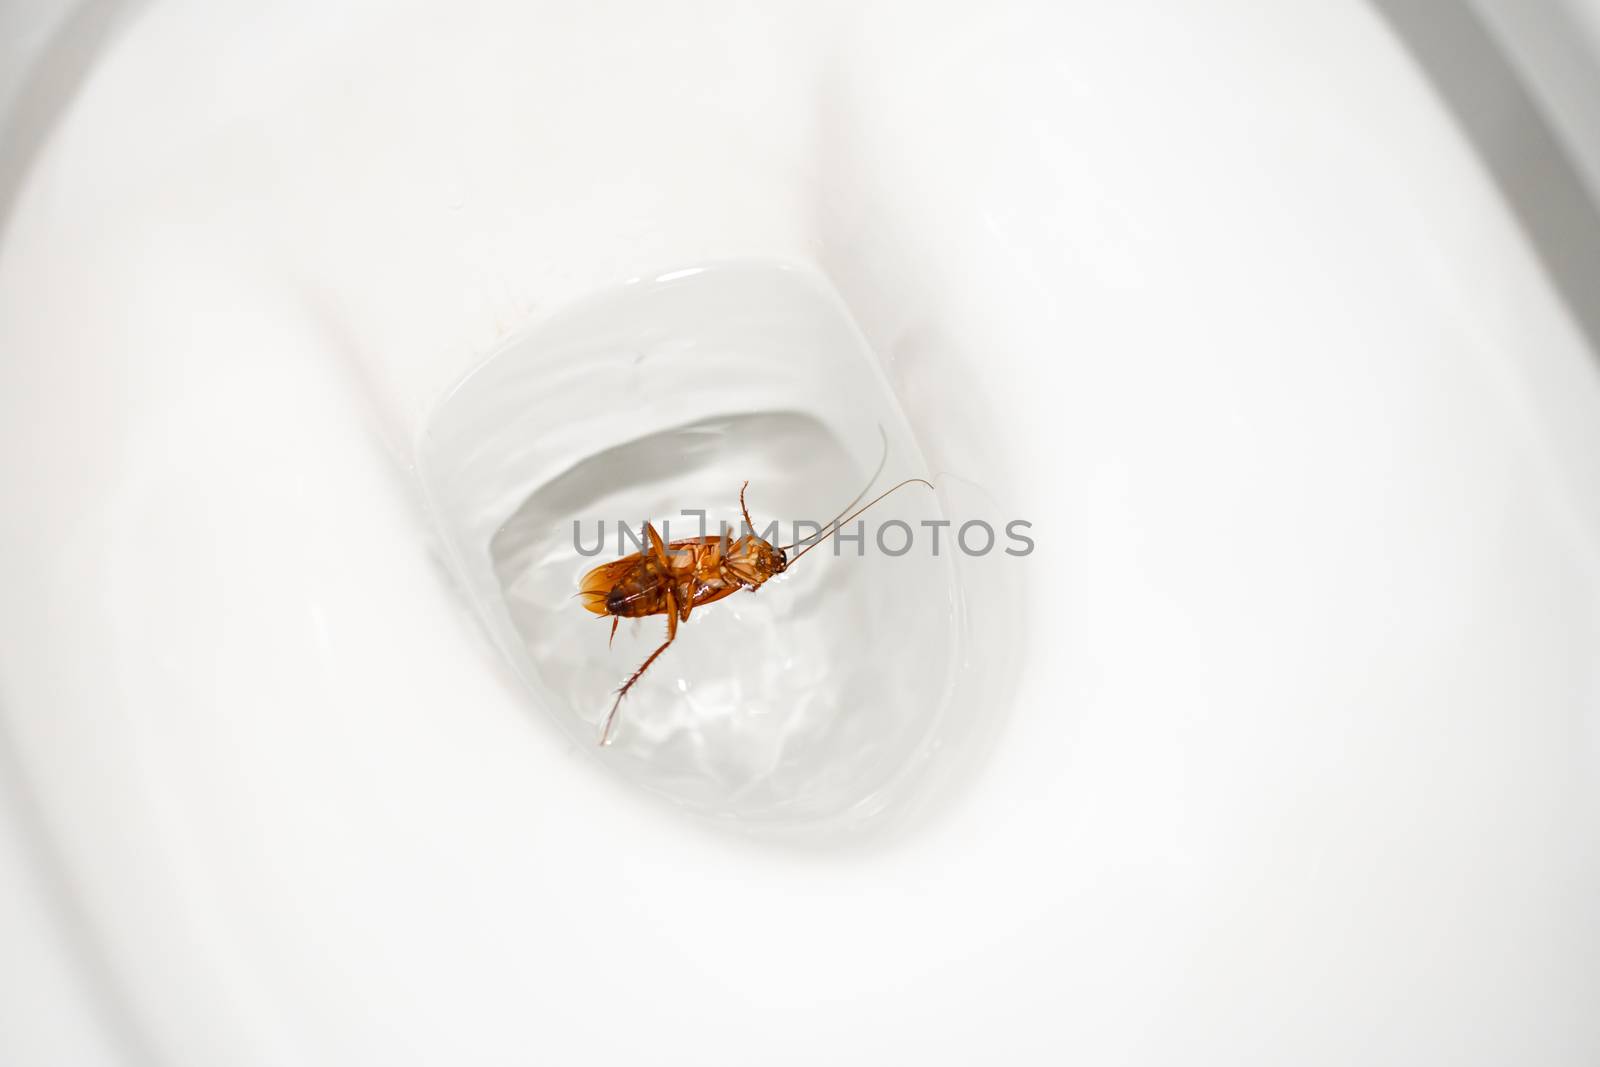 Huge cockroach in the toilet. Insect pests in the house. Get rid of cockroaches